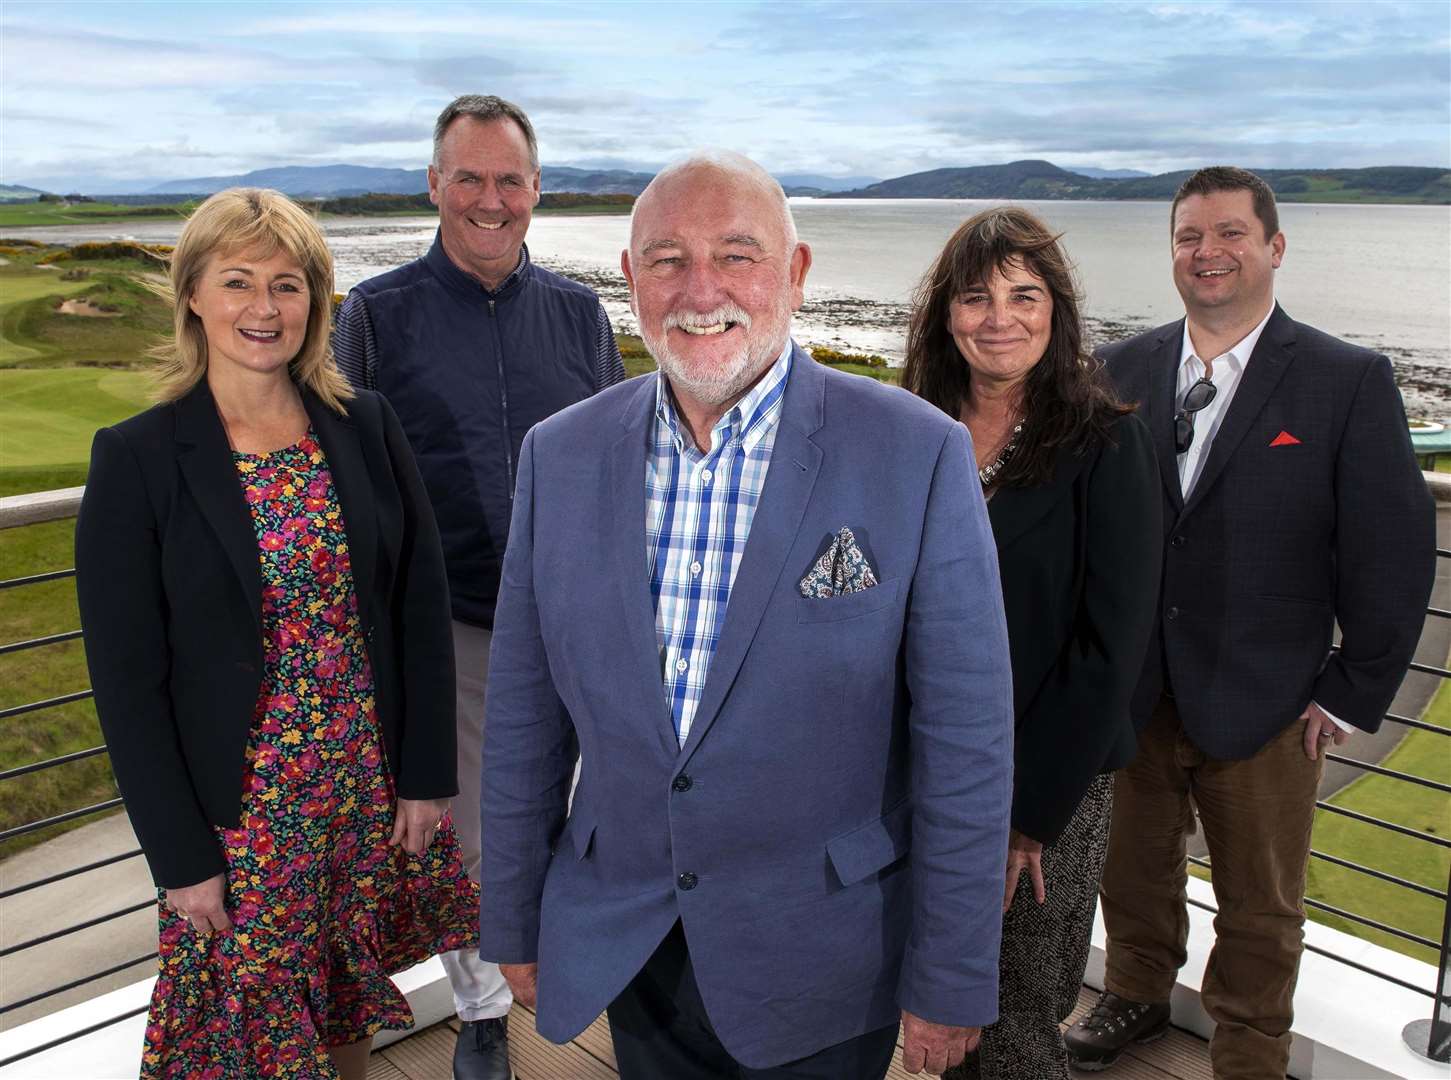 Highland Tourism CIC directors including (left) Yvonne Crook and (centre) Willie Cameron.